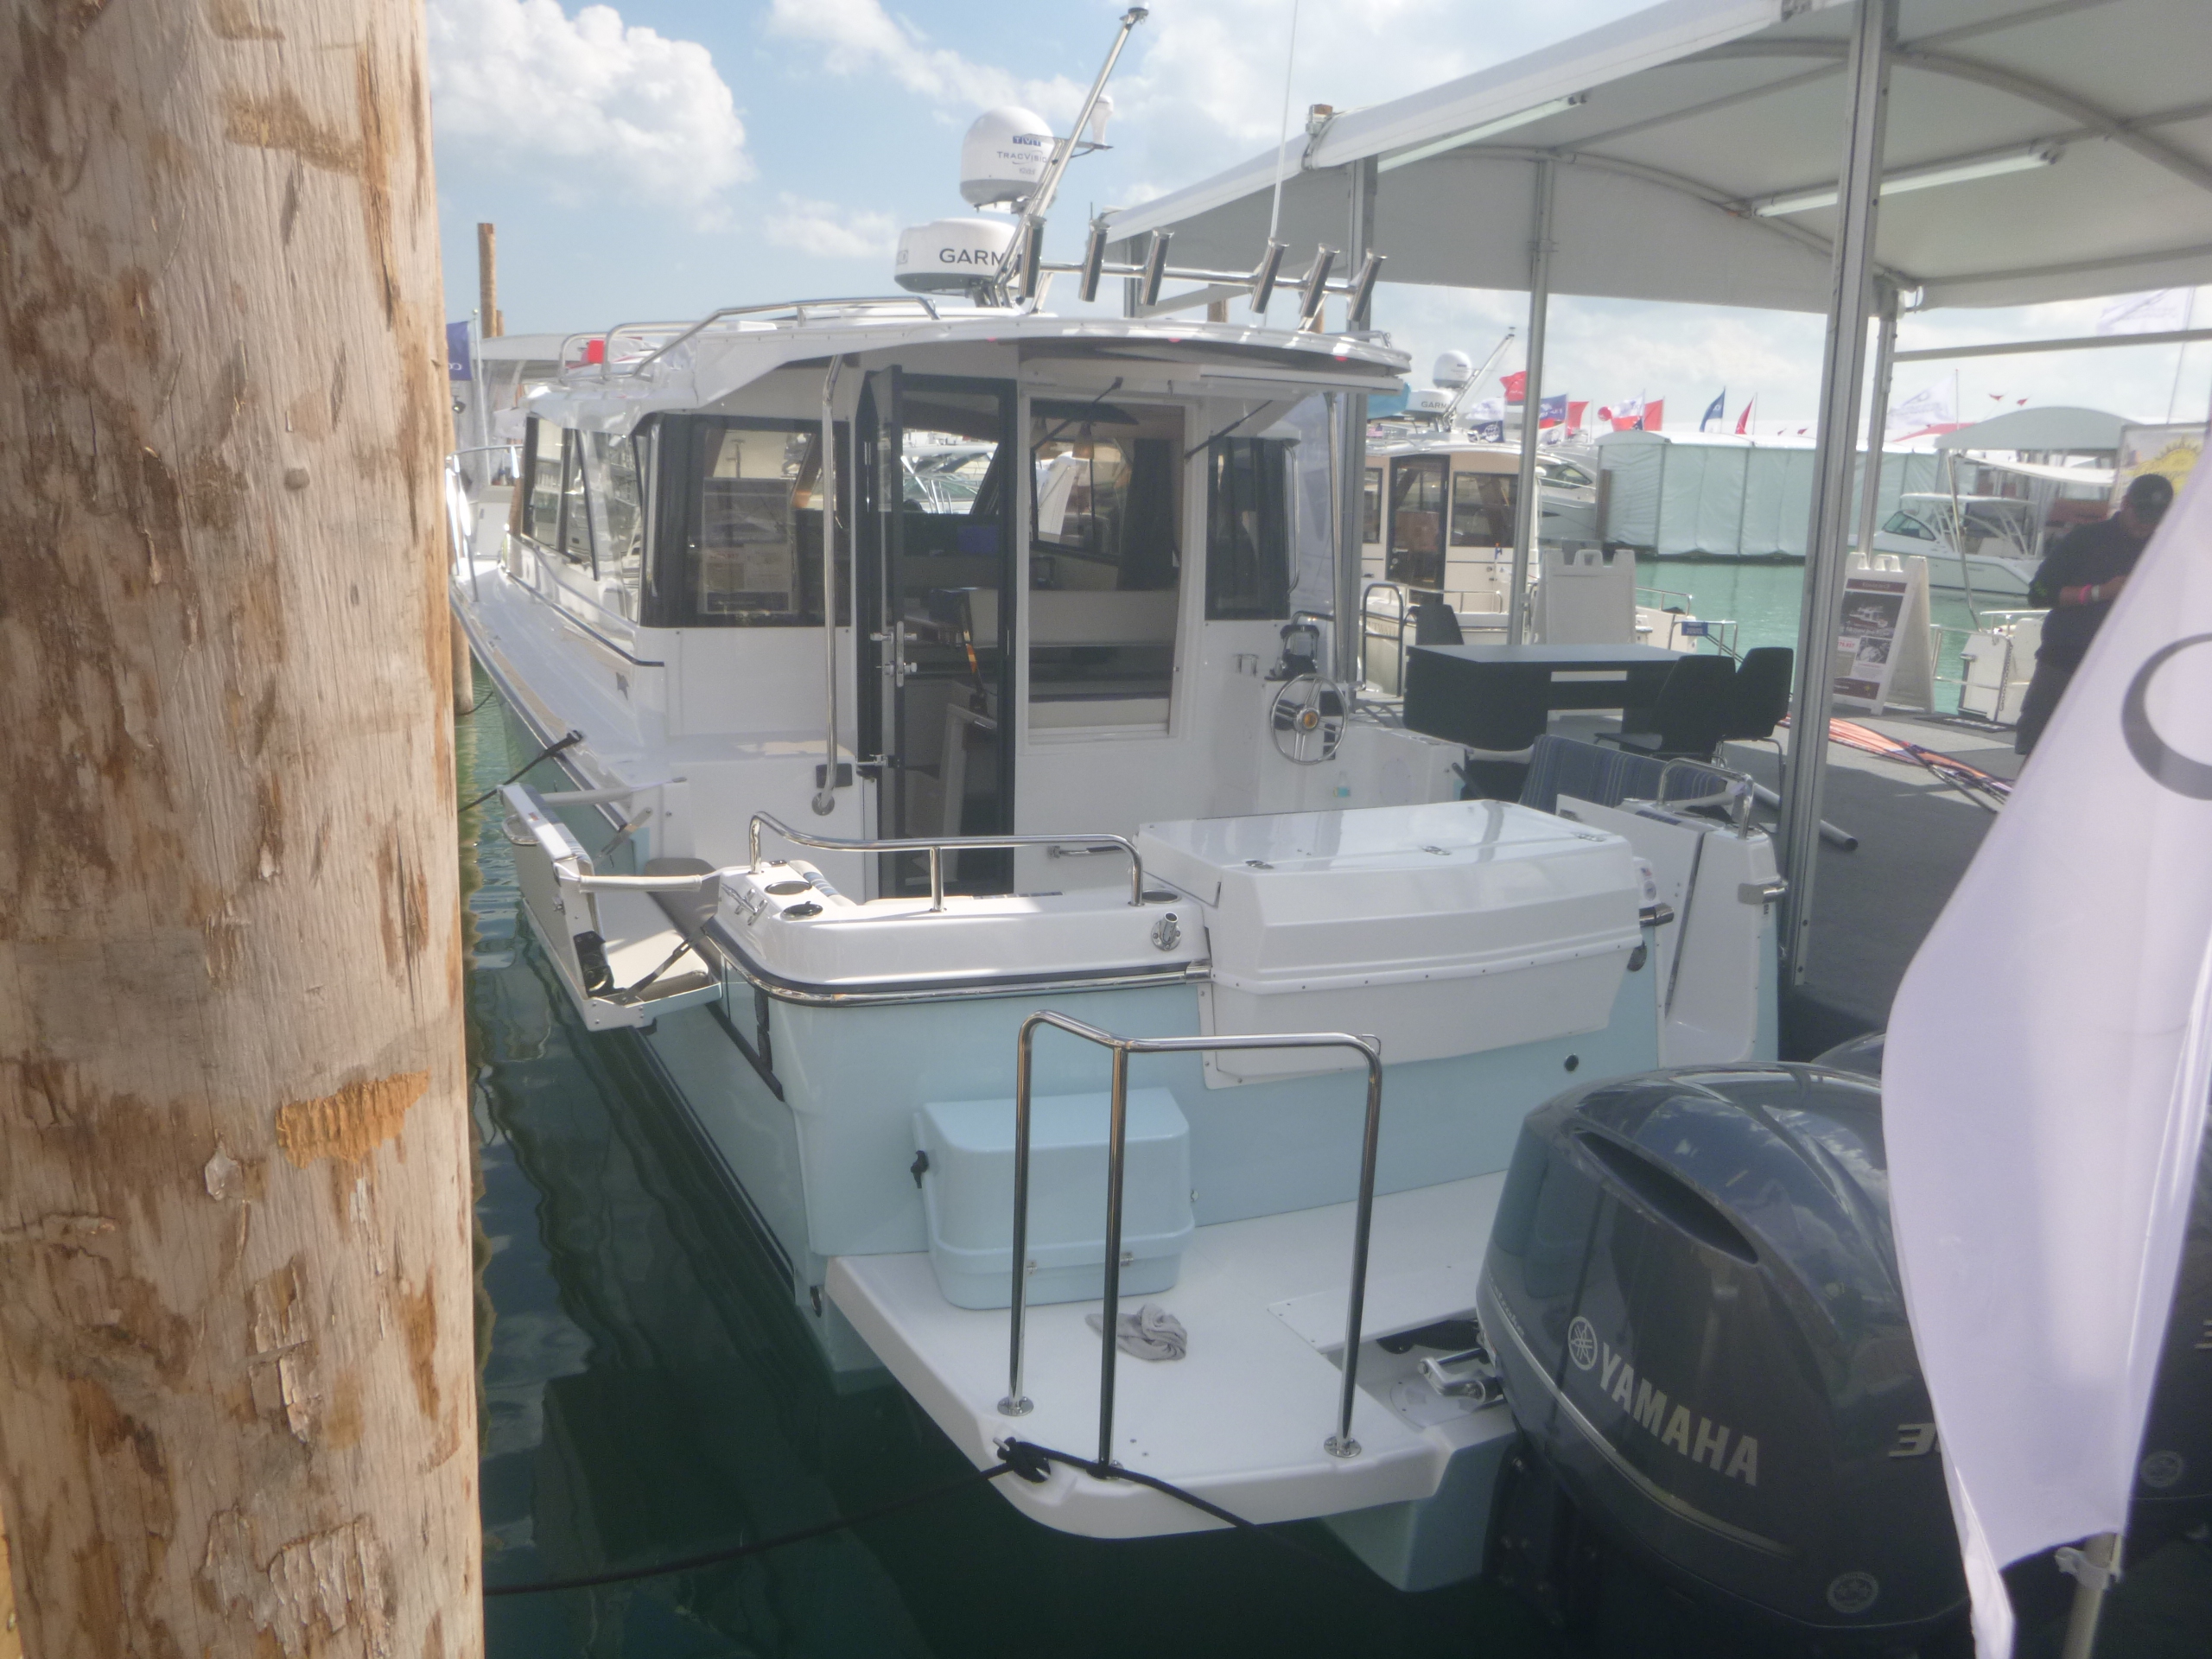 Transom of Cutwater boat docked at the Miami Boat Show